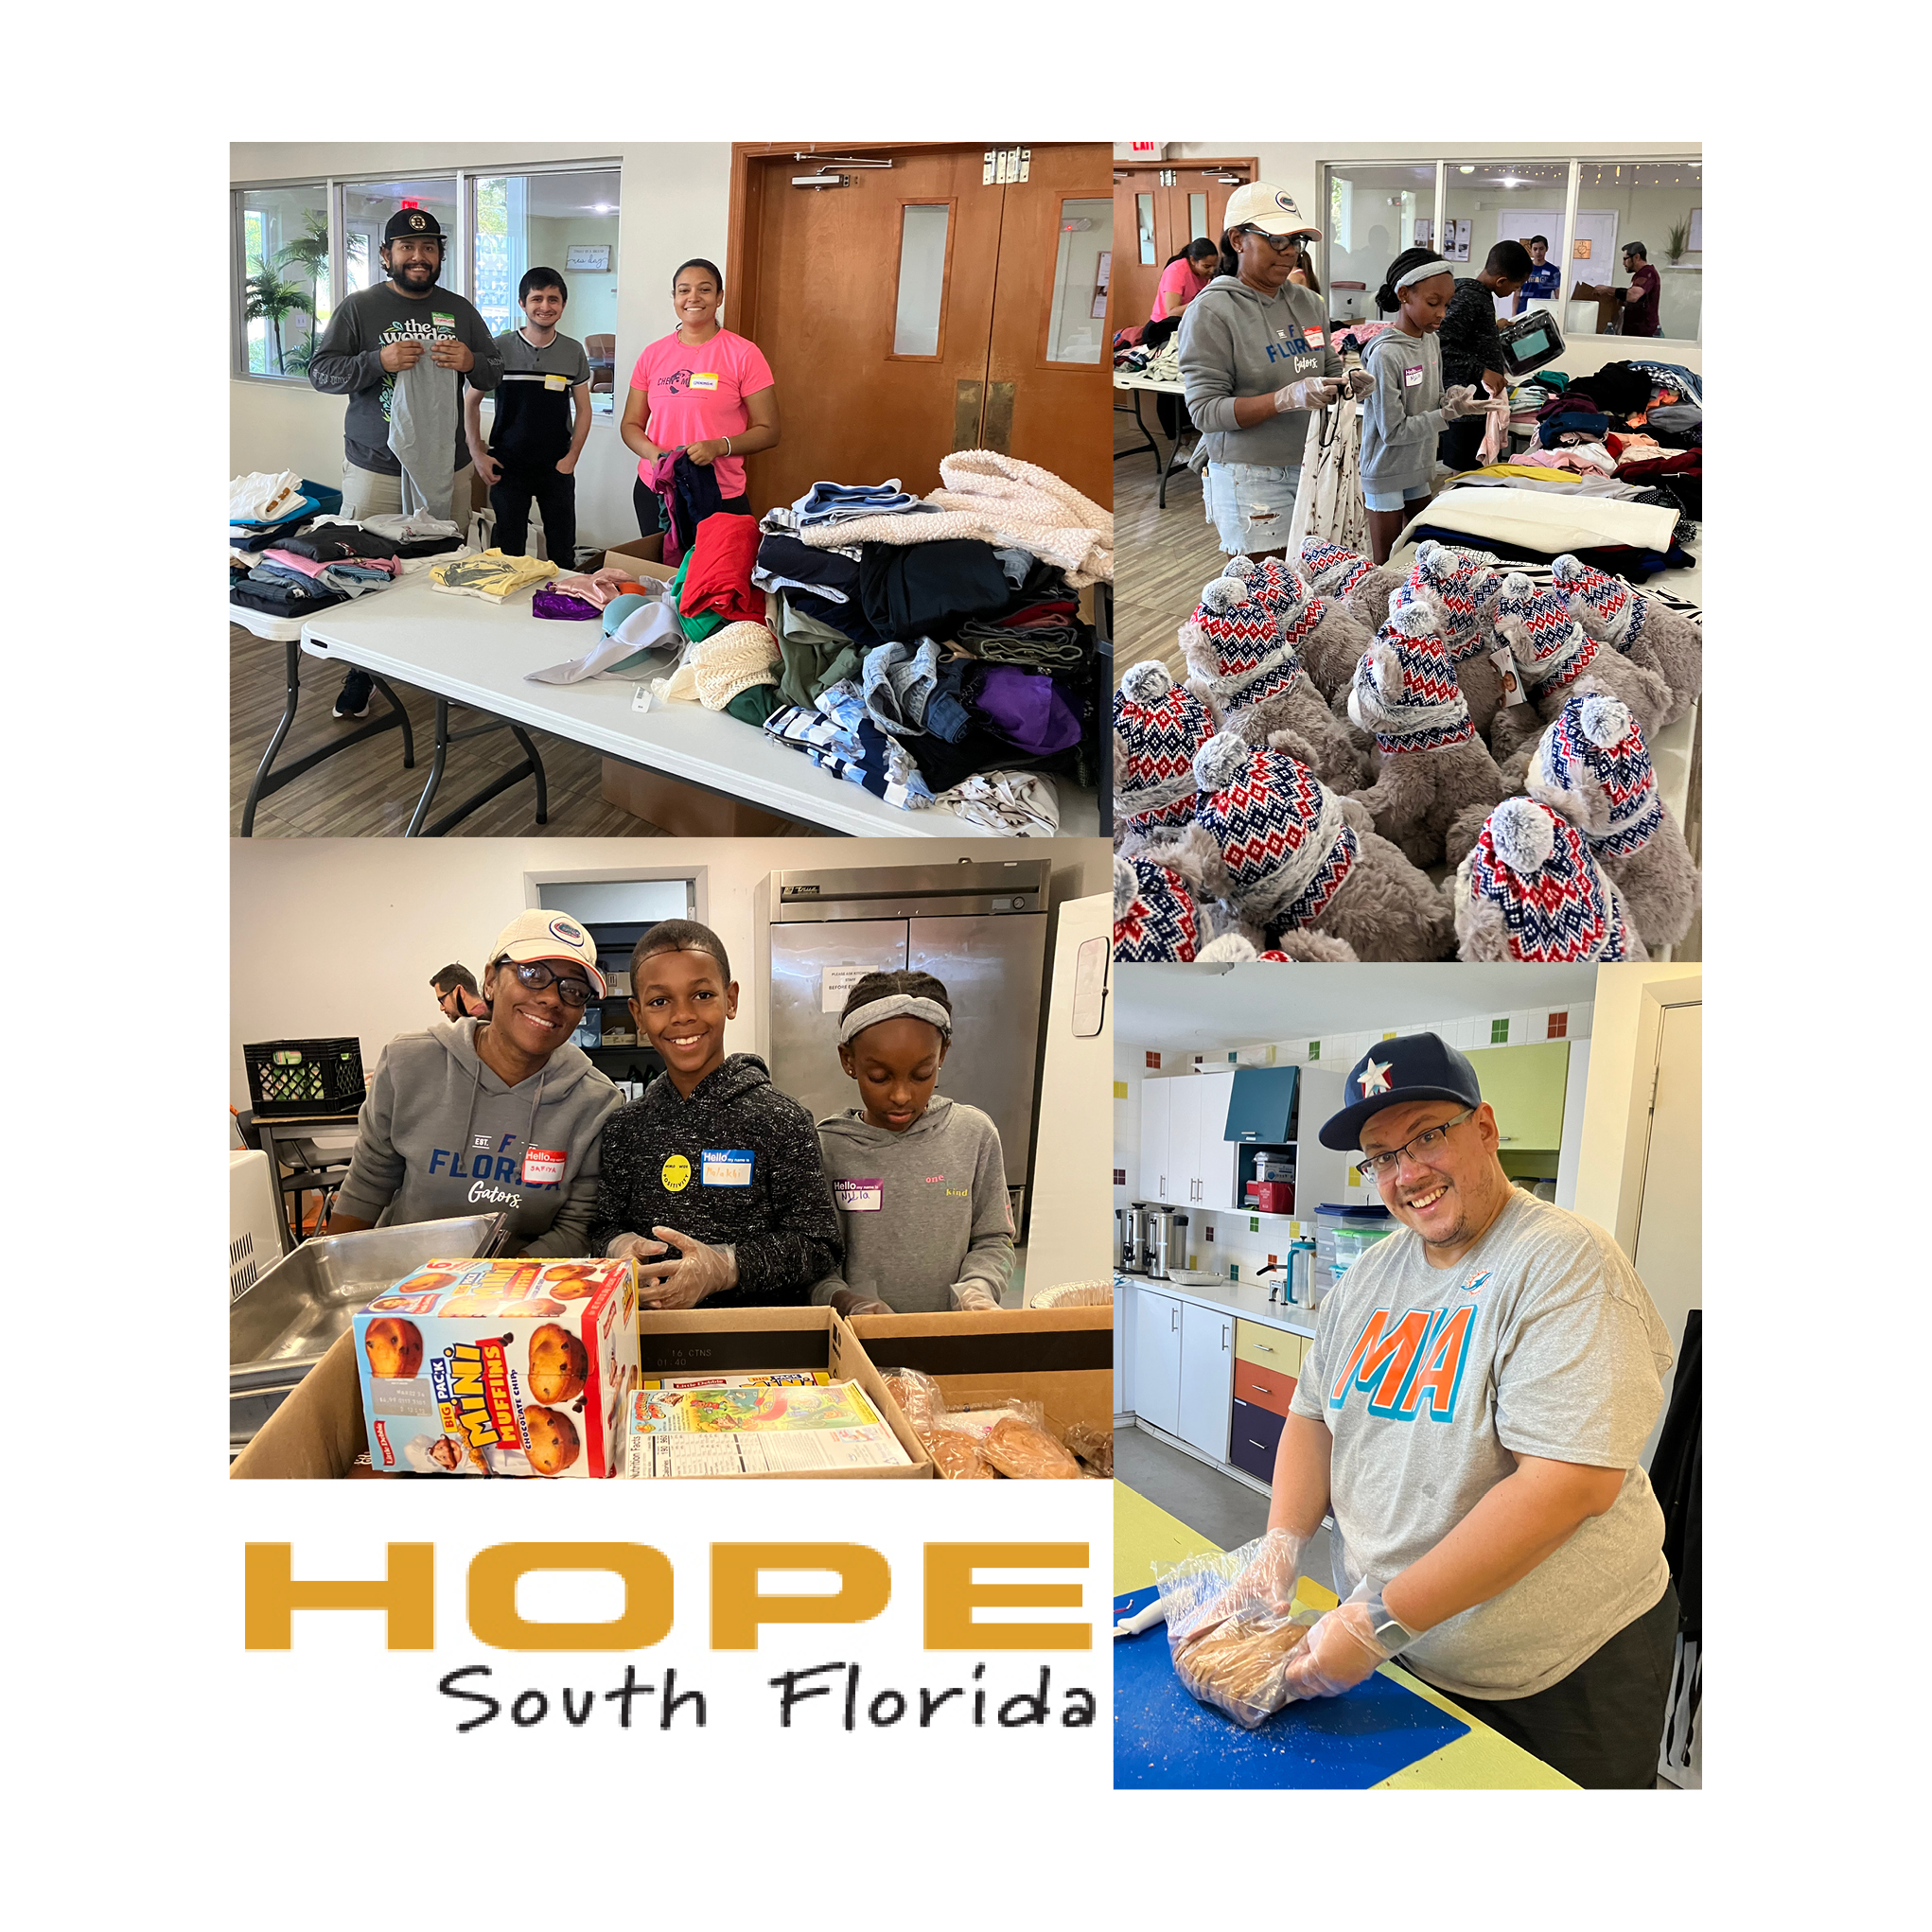 Hope South Florida’s Shared Meal Event